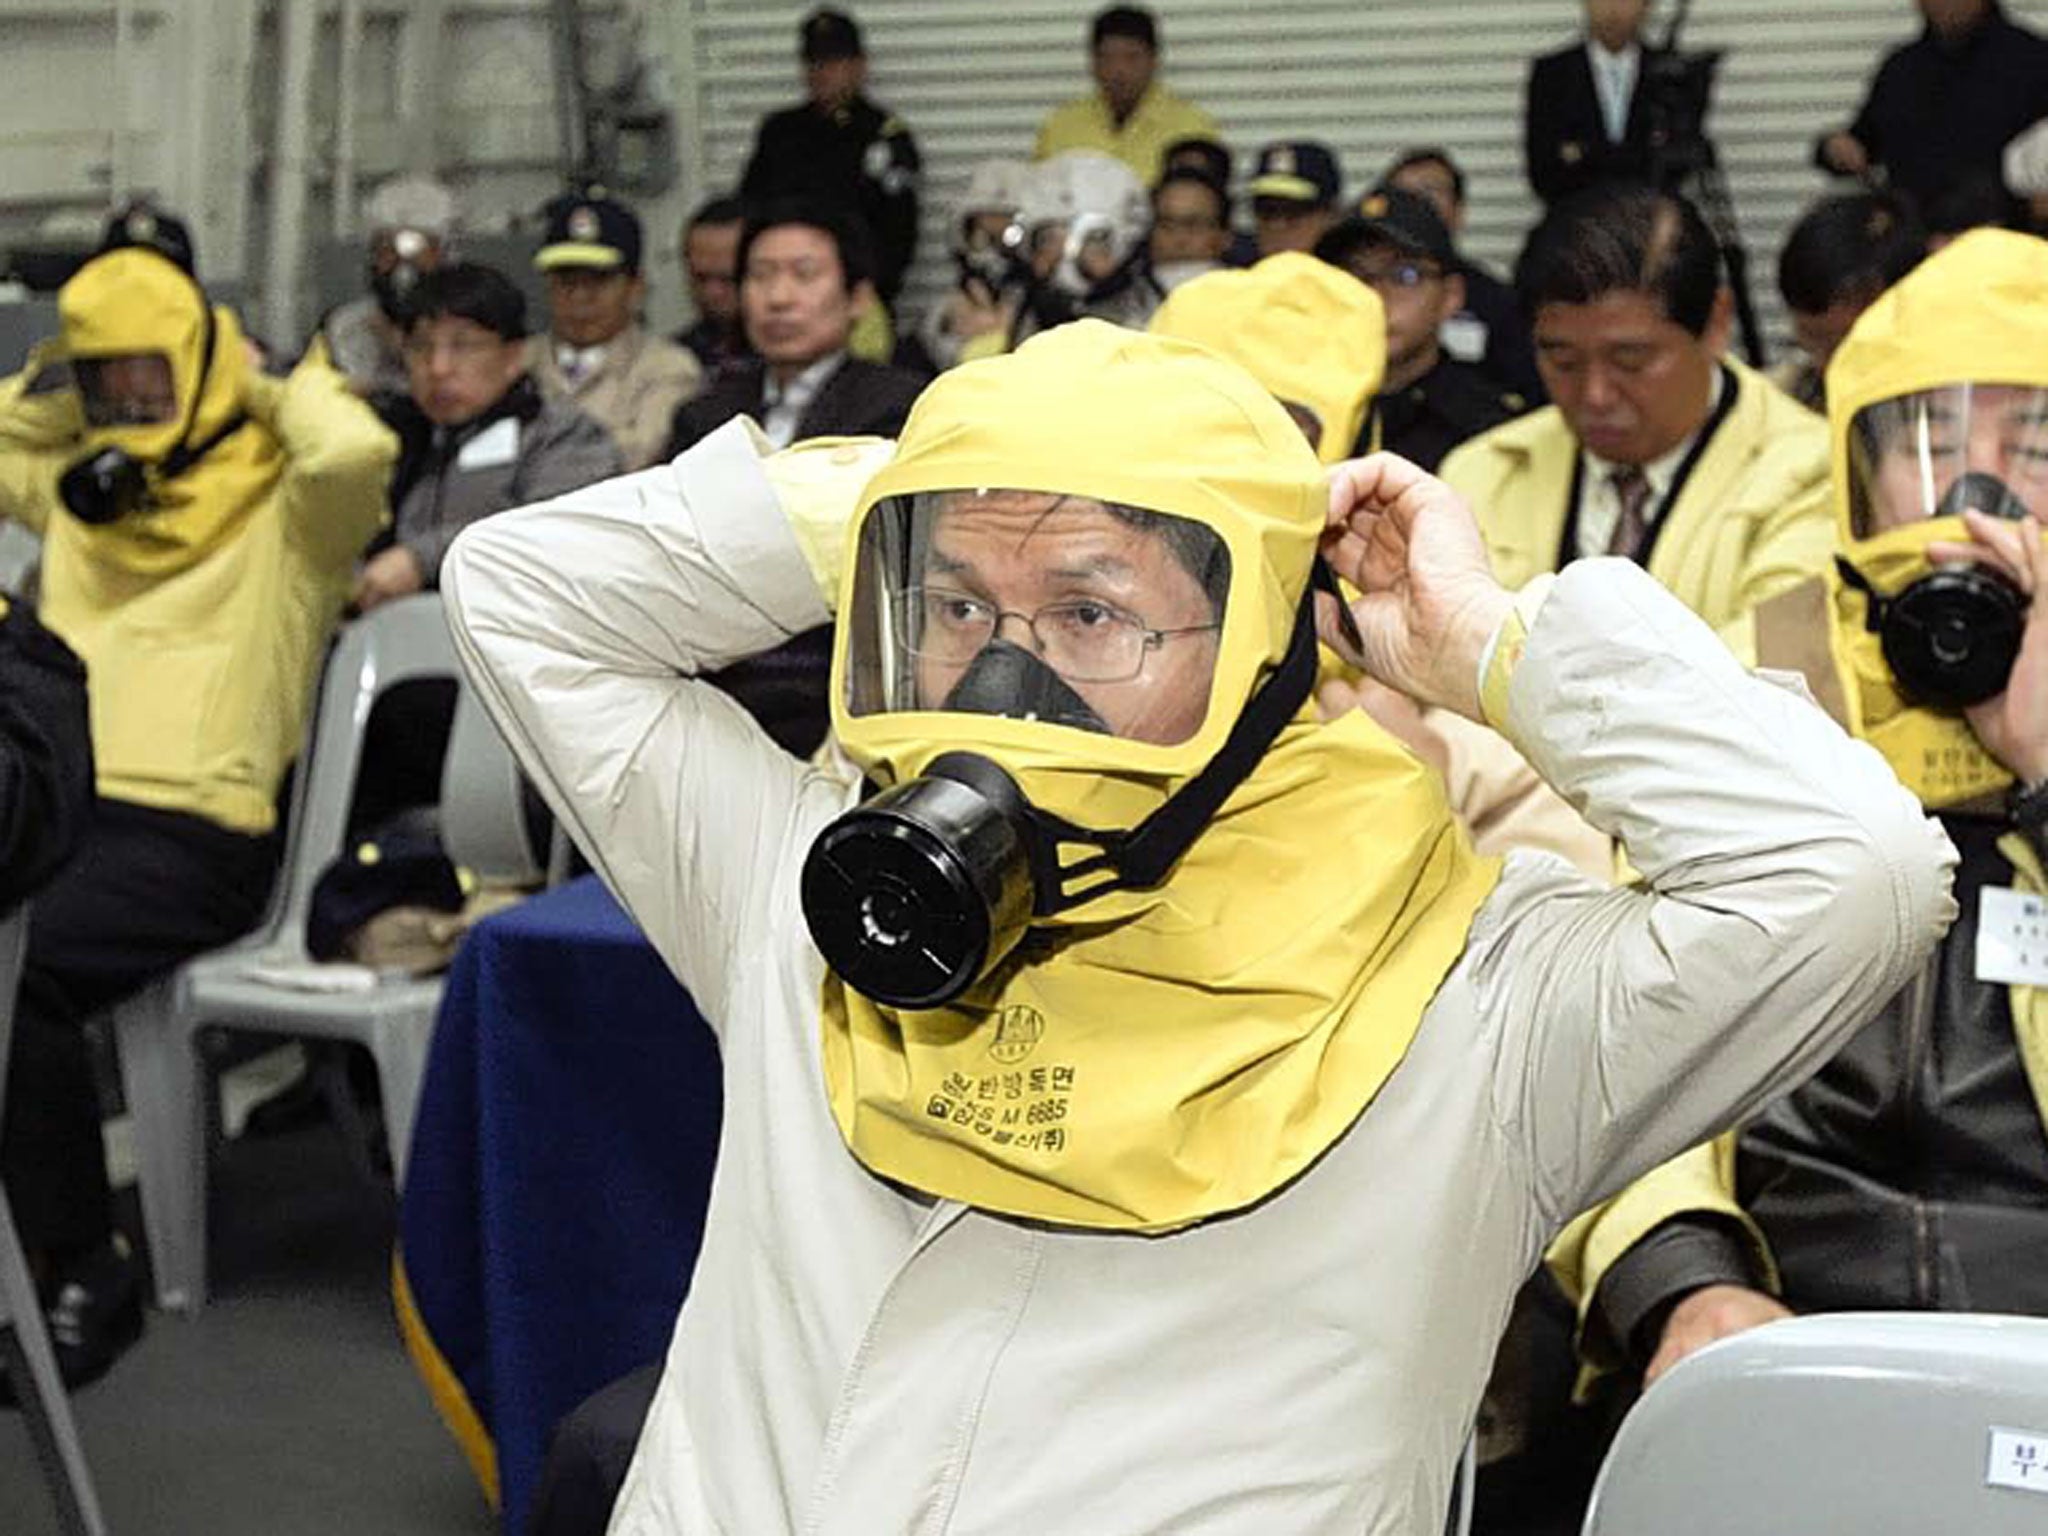 A civil defence drill at a navy base in Pyeongtaek, south of Seoul, yesterday. Around 500 South Koreans are still at the Kaesong industrial complex